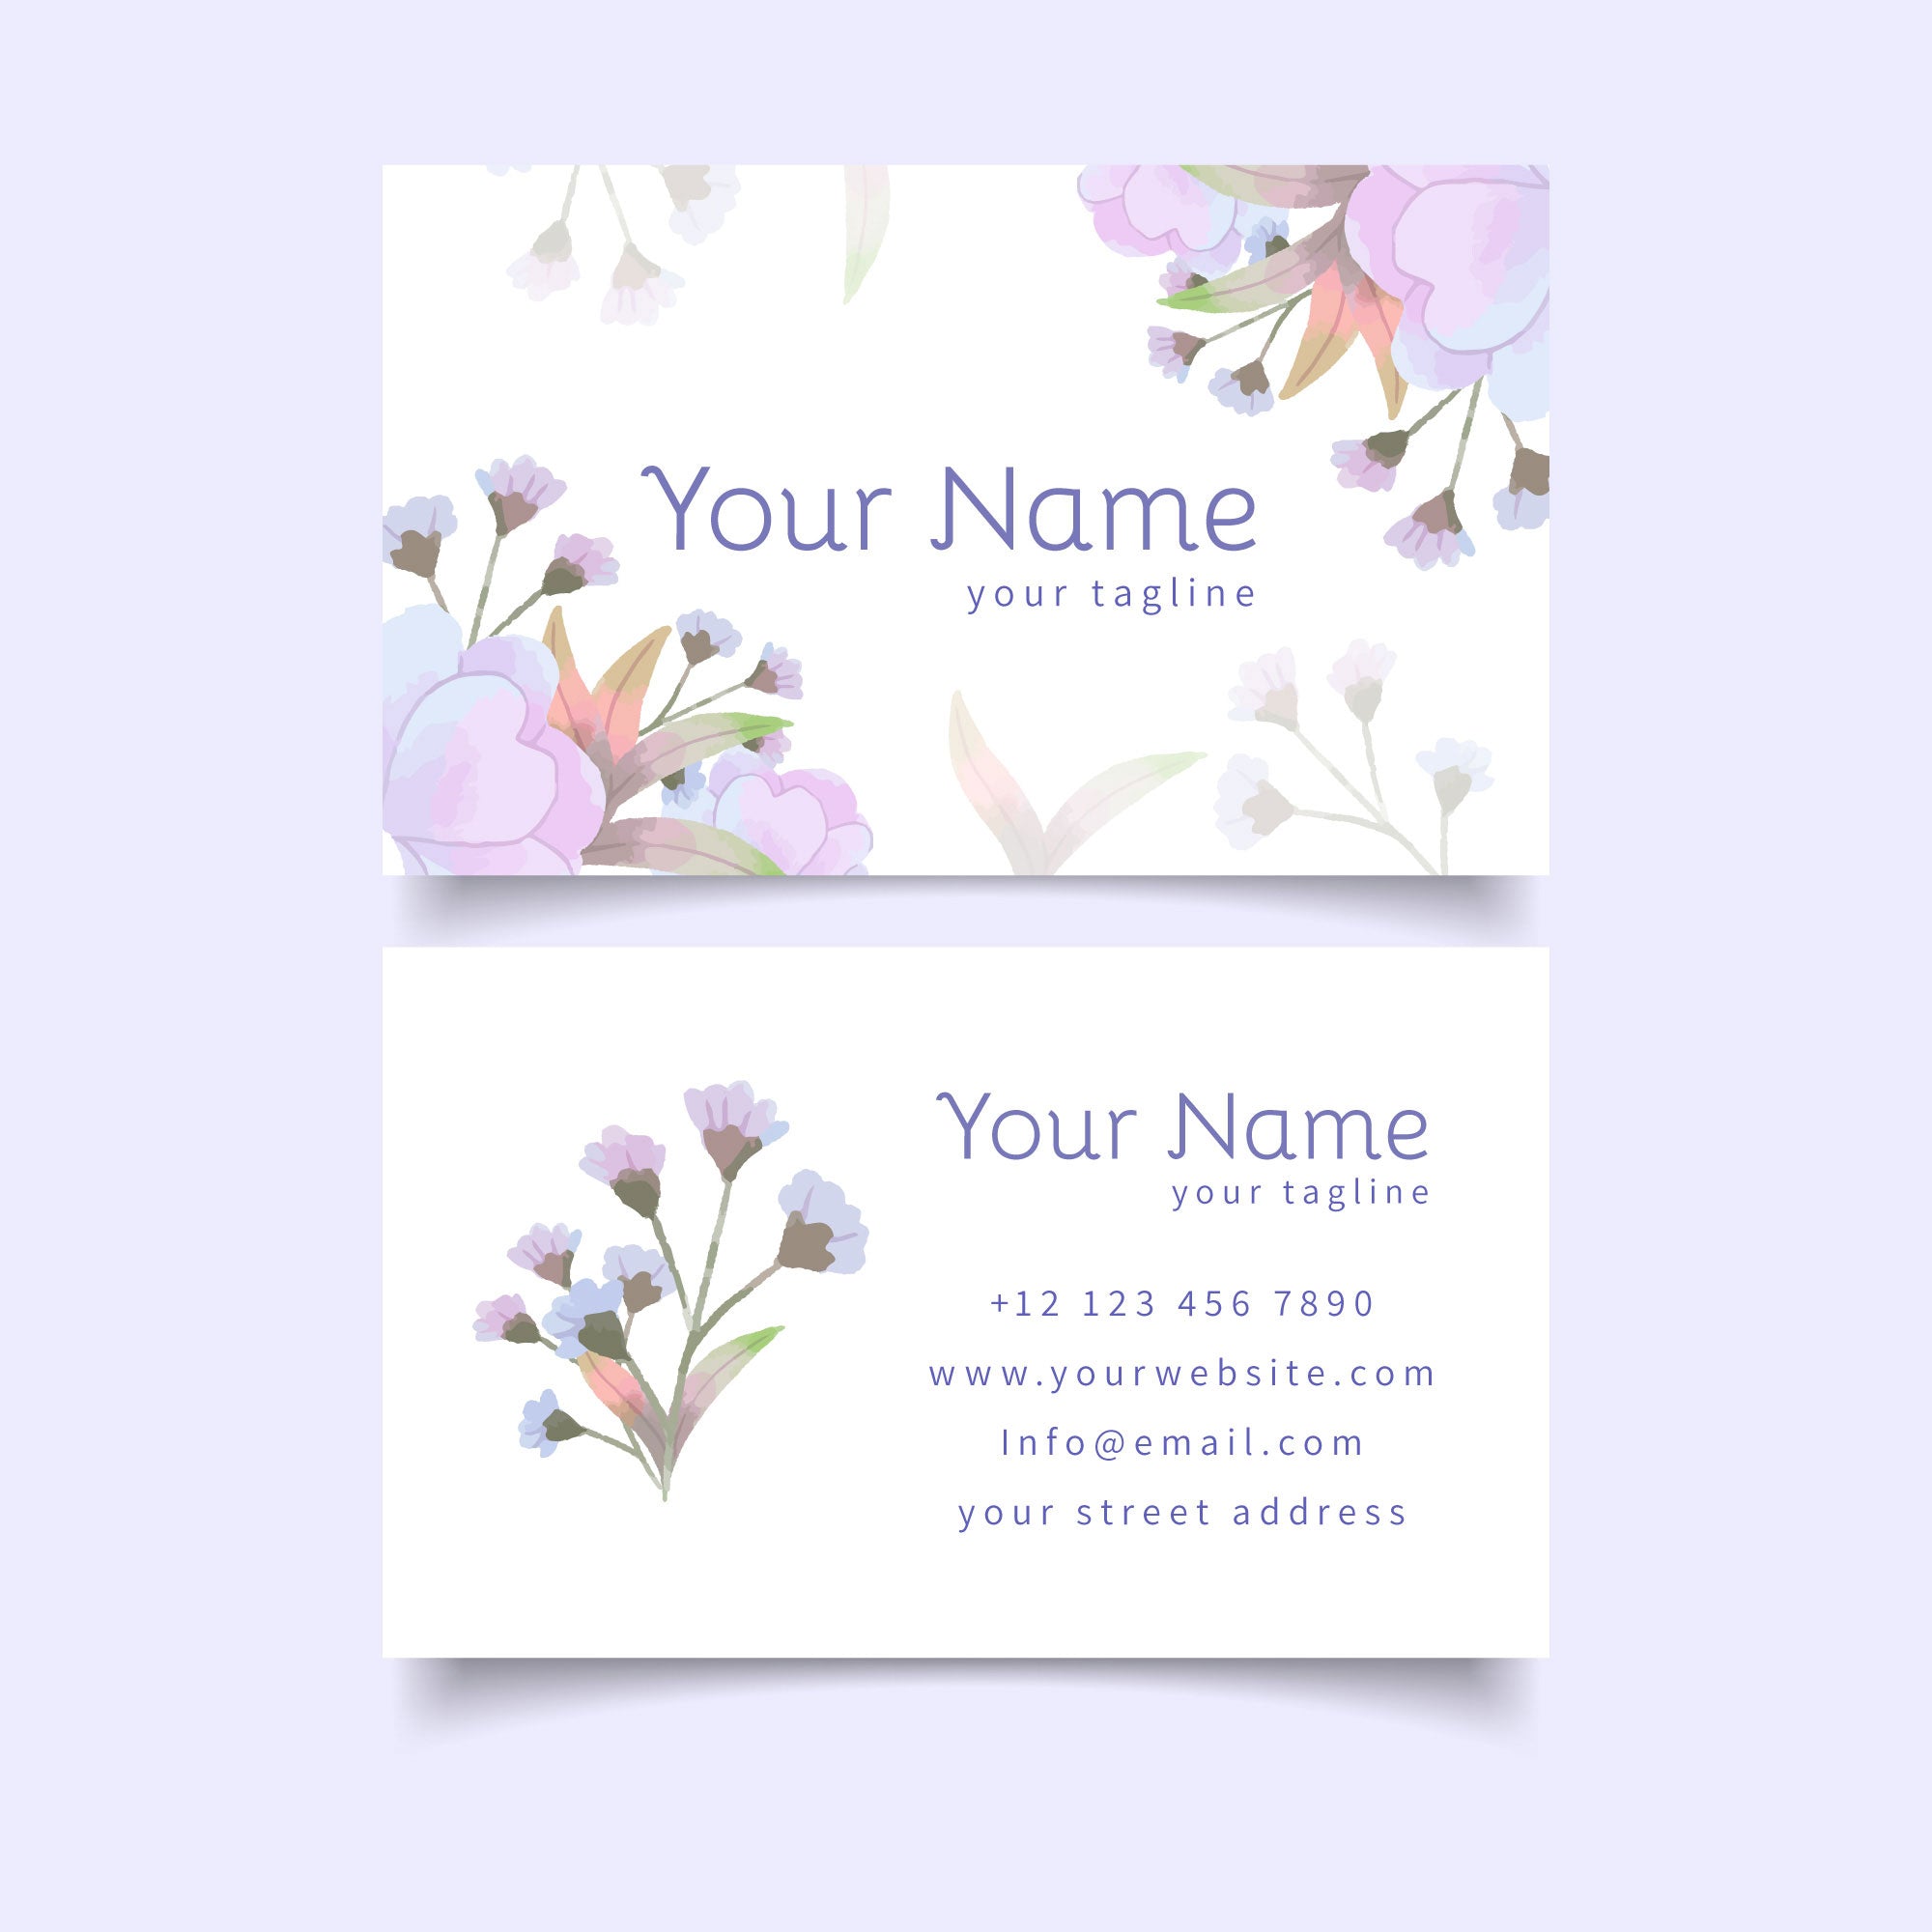 Plantable Full Of Floral Business Cards - 250 Cards